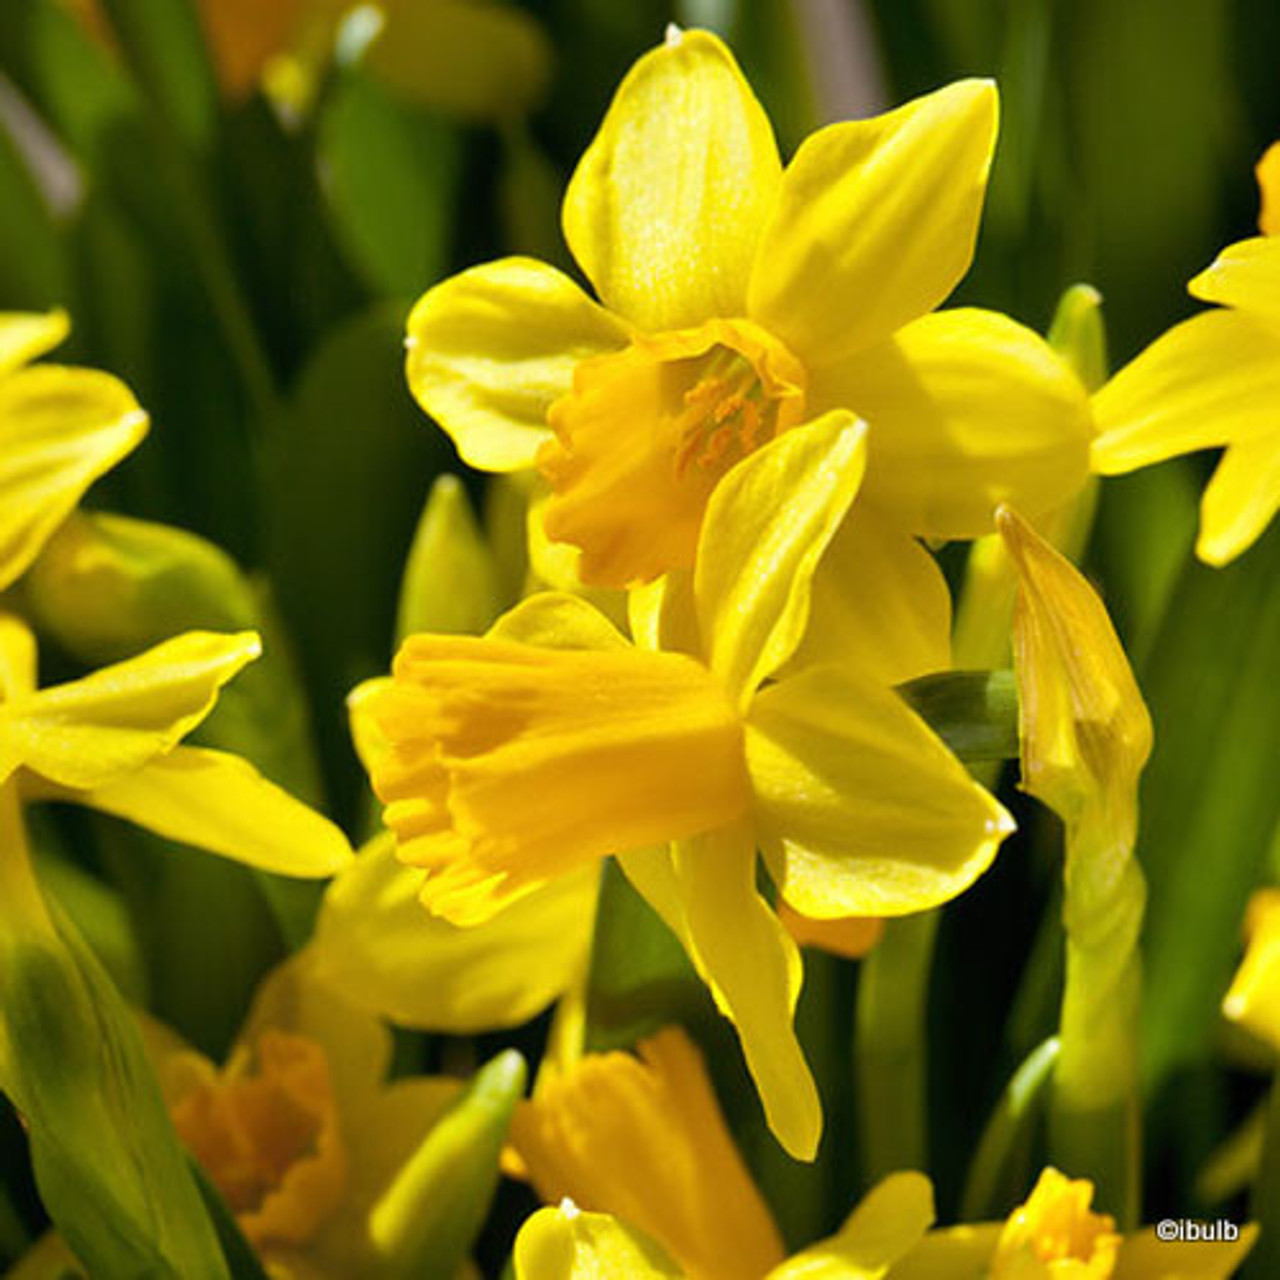 Daff tete-a-tete - Bunkers Hill Plant Nursery